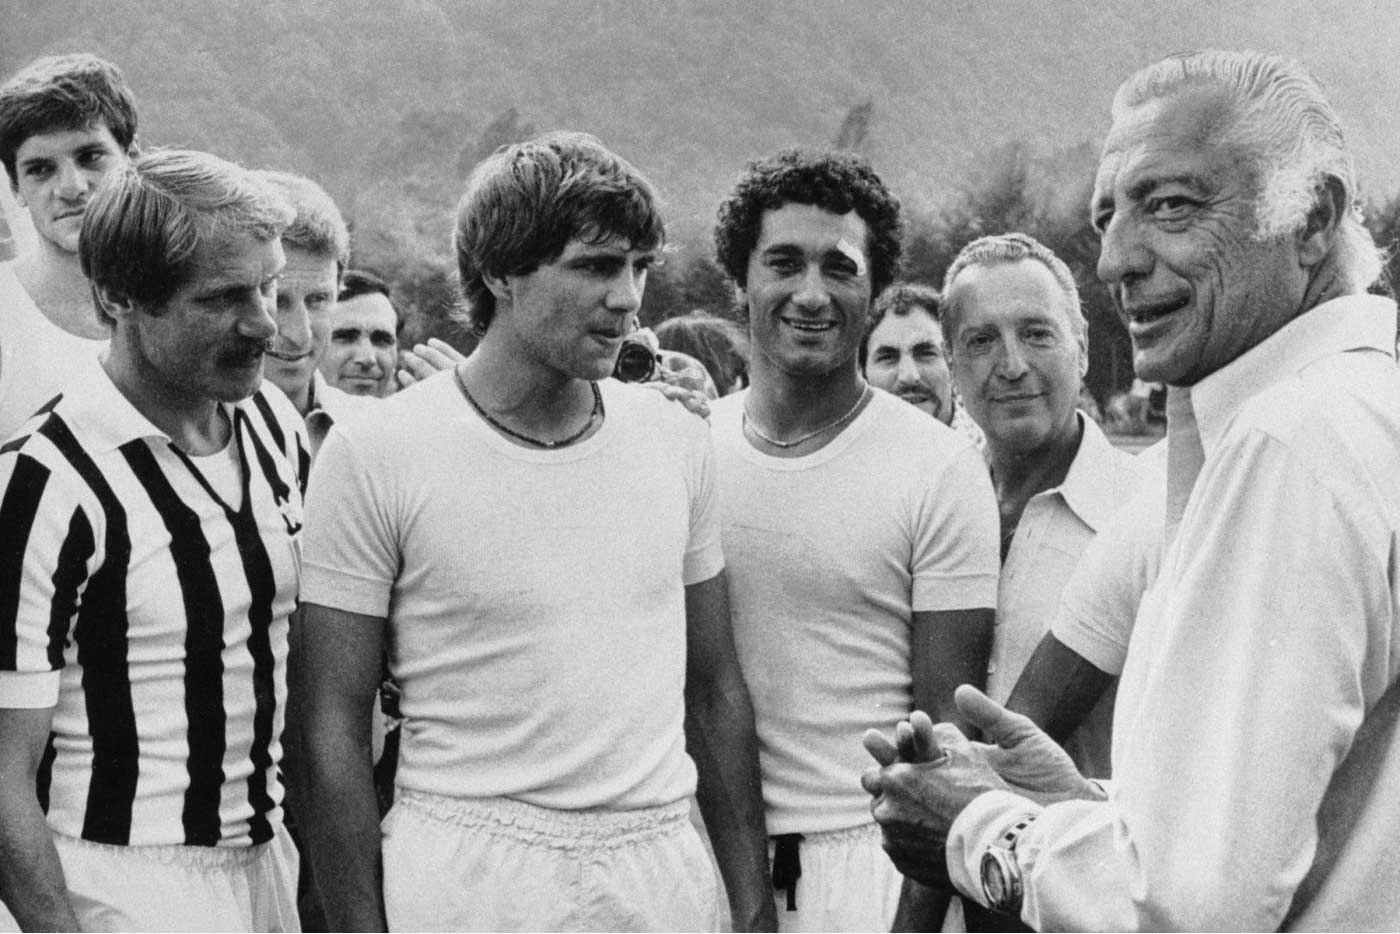 Gents from the Juventus Football Club, with club patron Gianni Agnelli, who is seen here wearing an Omega PloProf Seamaster Professional 600m ref. 166.077, over his cuff